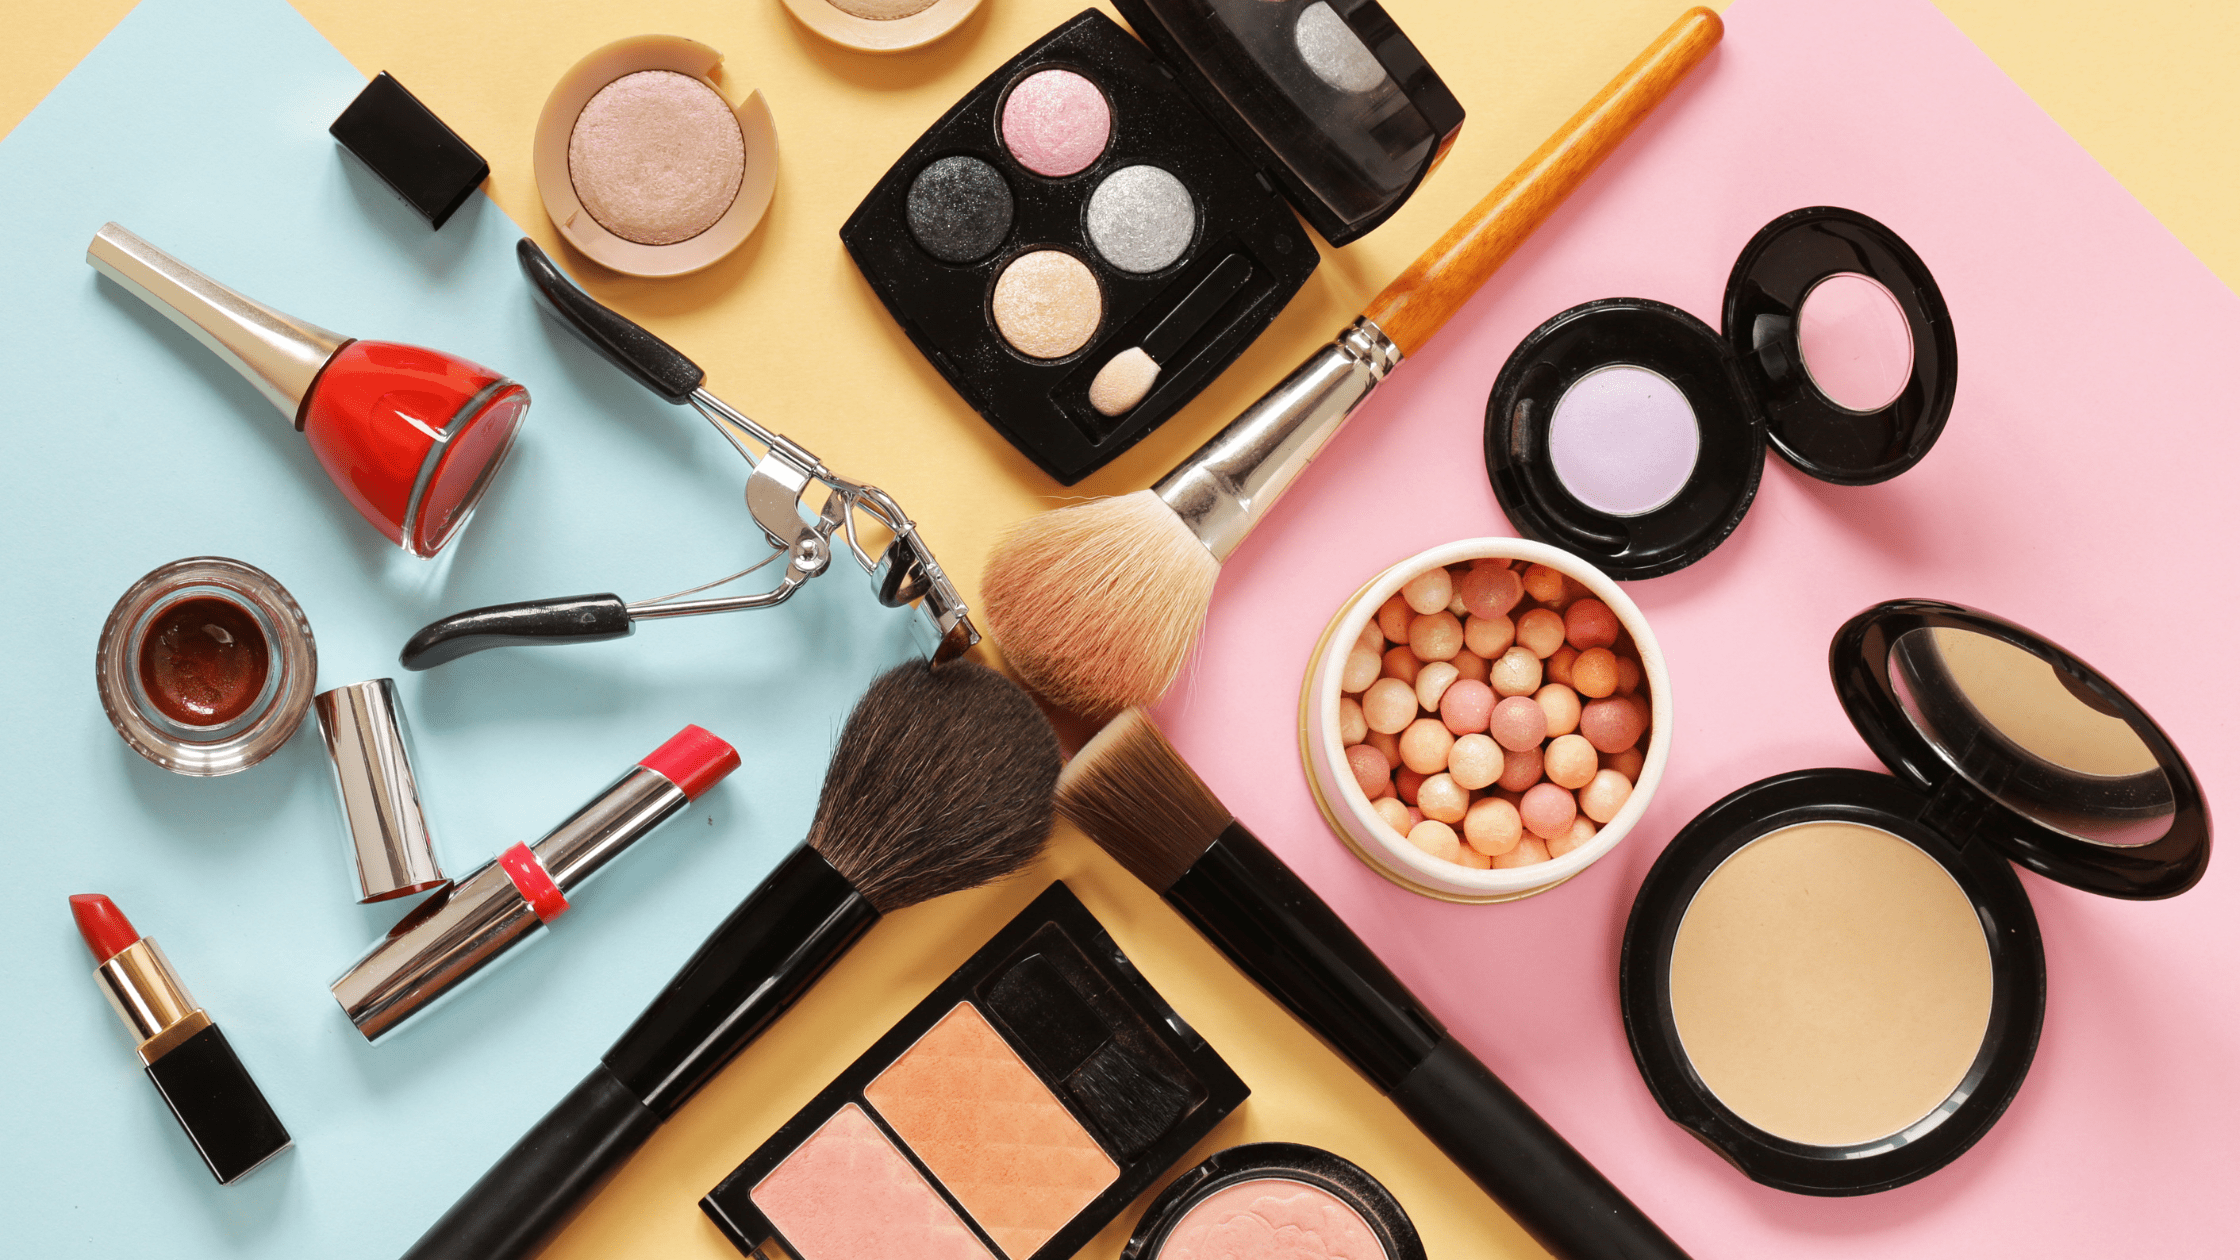 Array of makeup products for a natural look